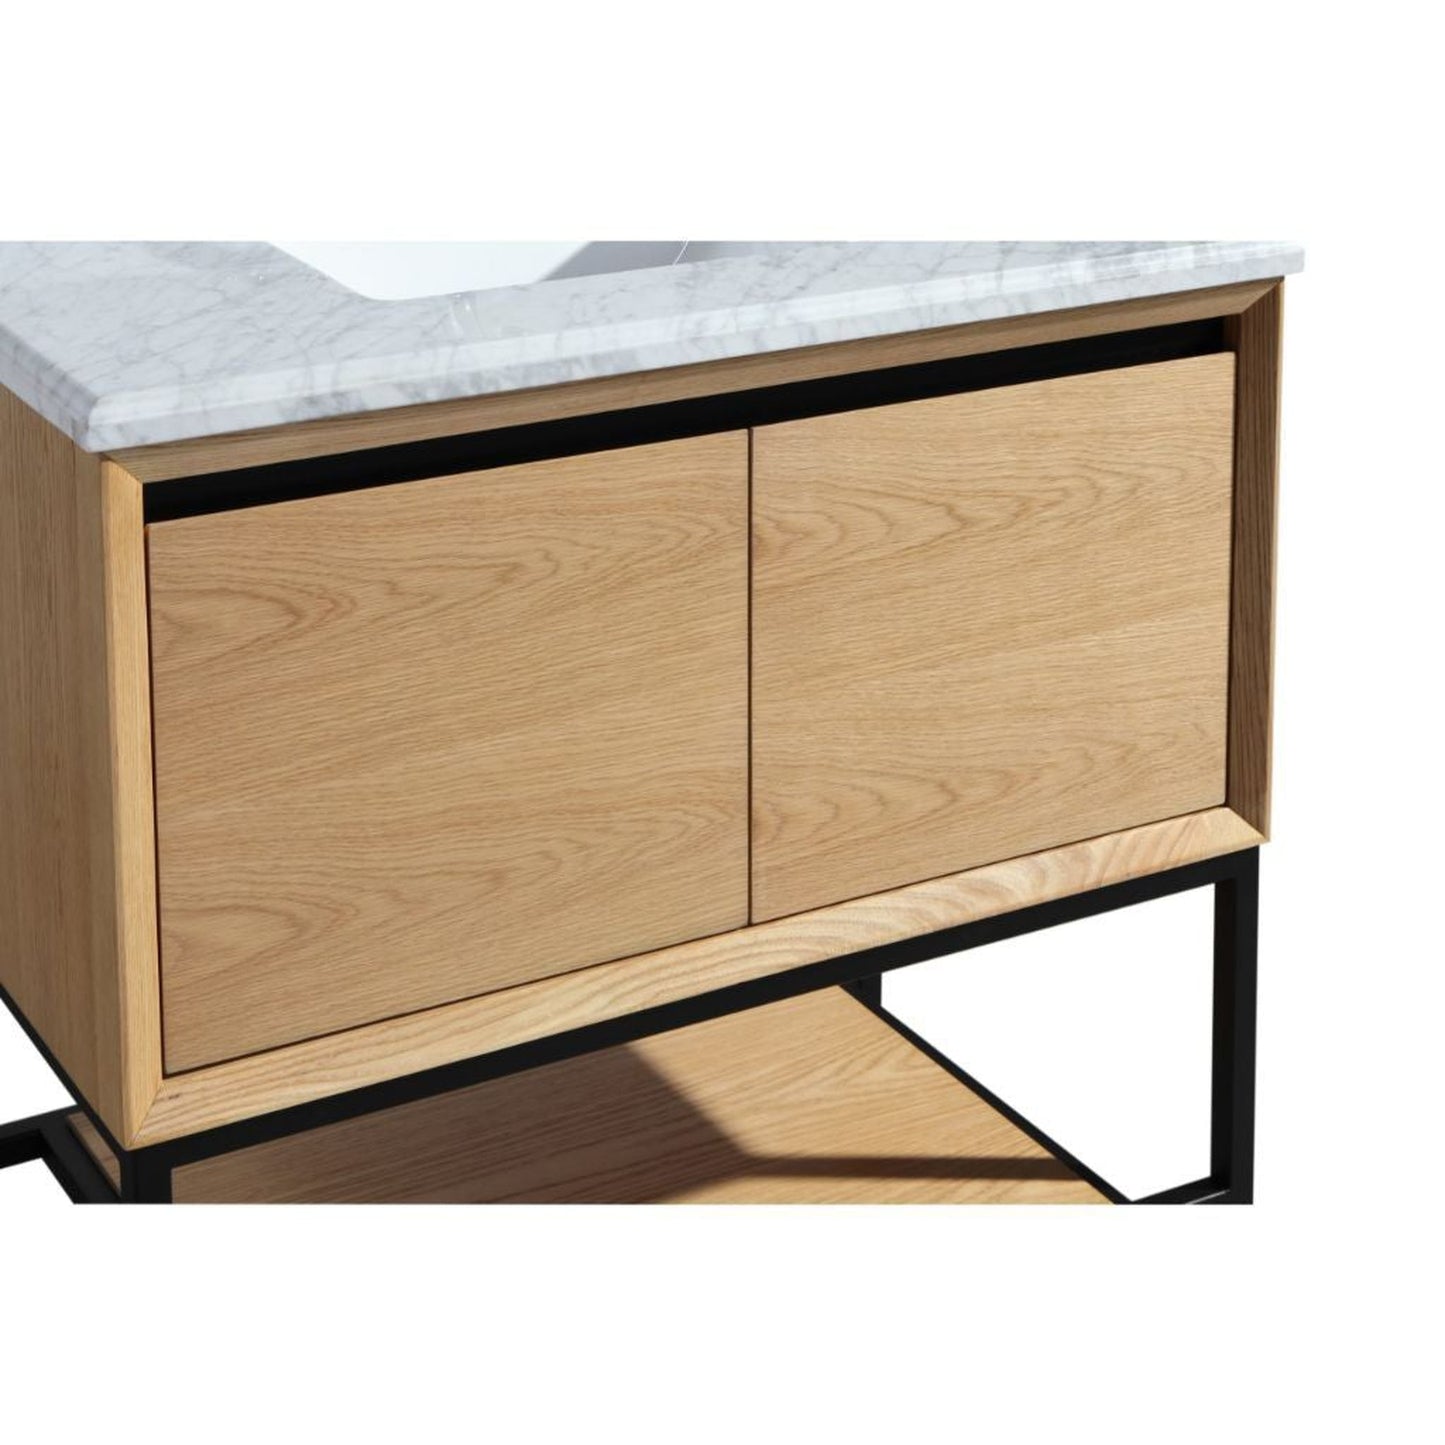 Laviva Alto 36" California White Oak Vanity Base and Matte White Solid Surface Countertop With Integrated Sink